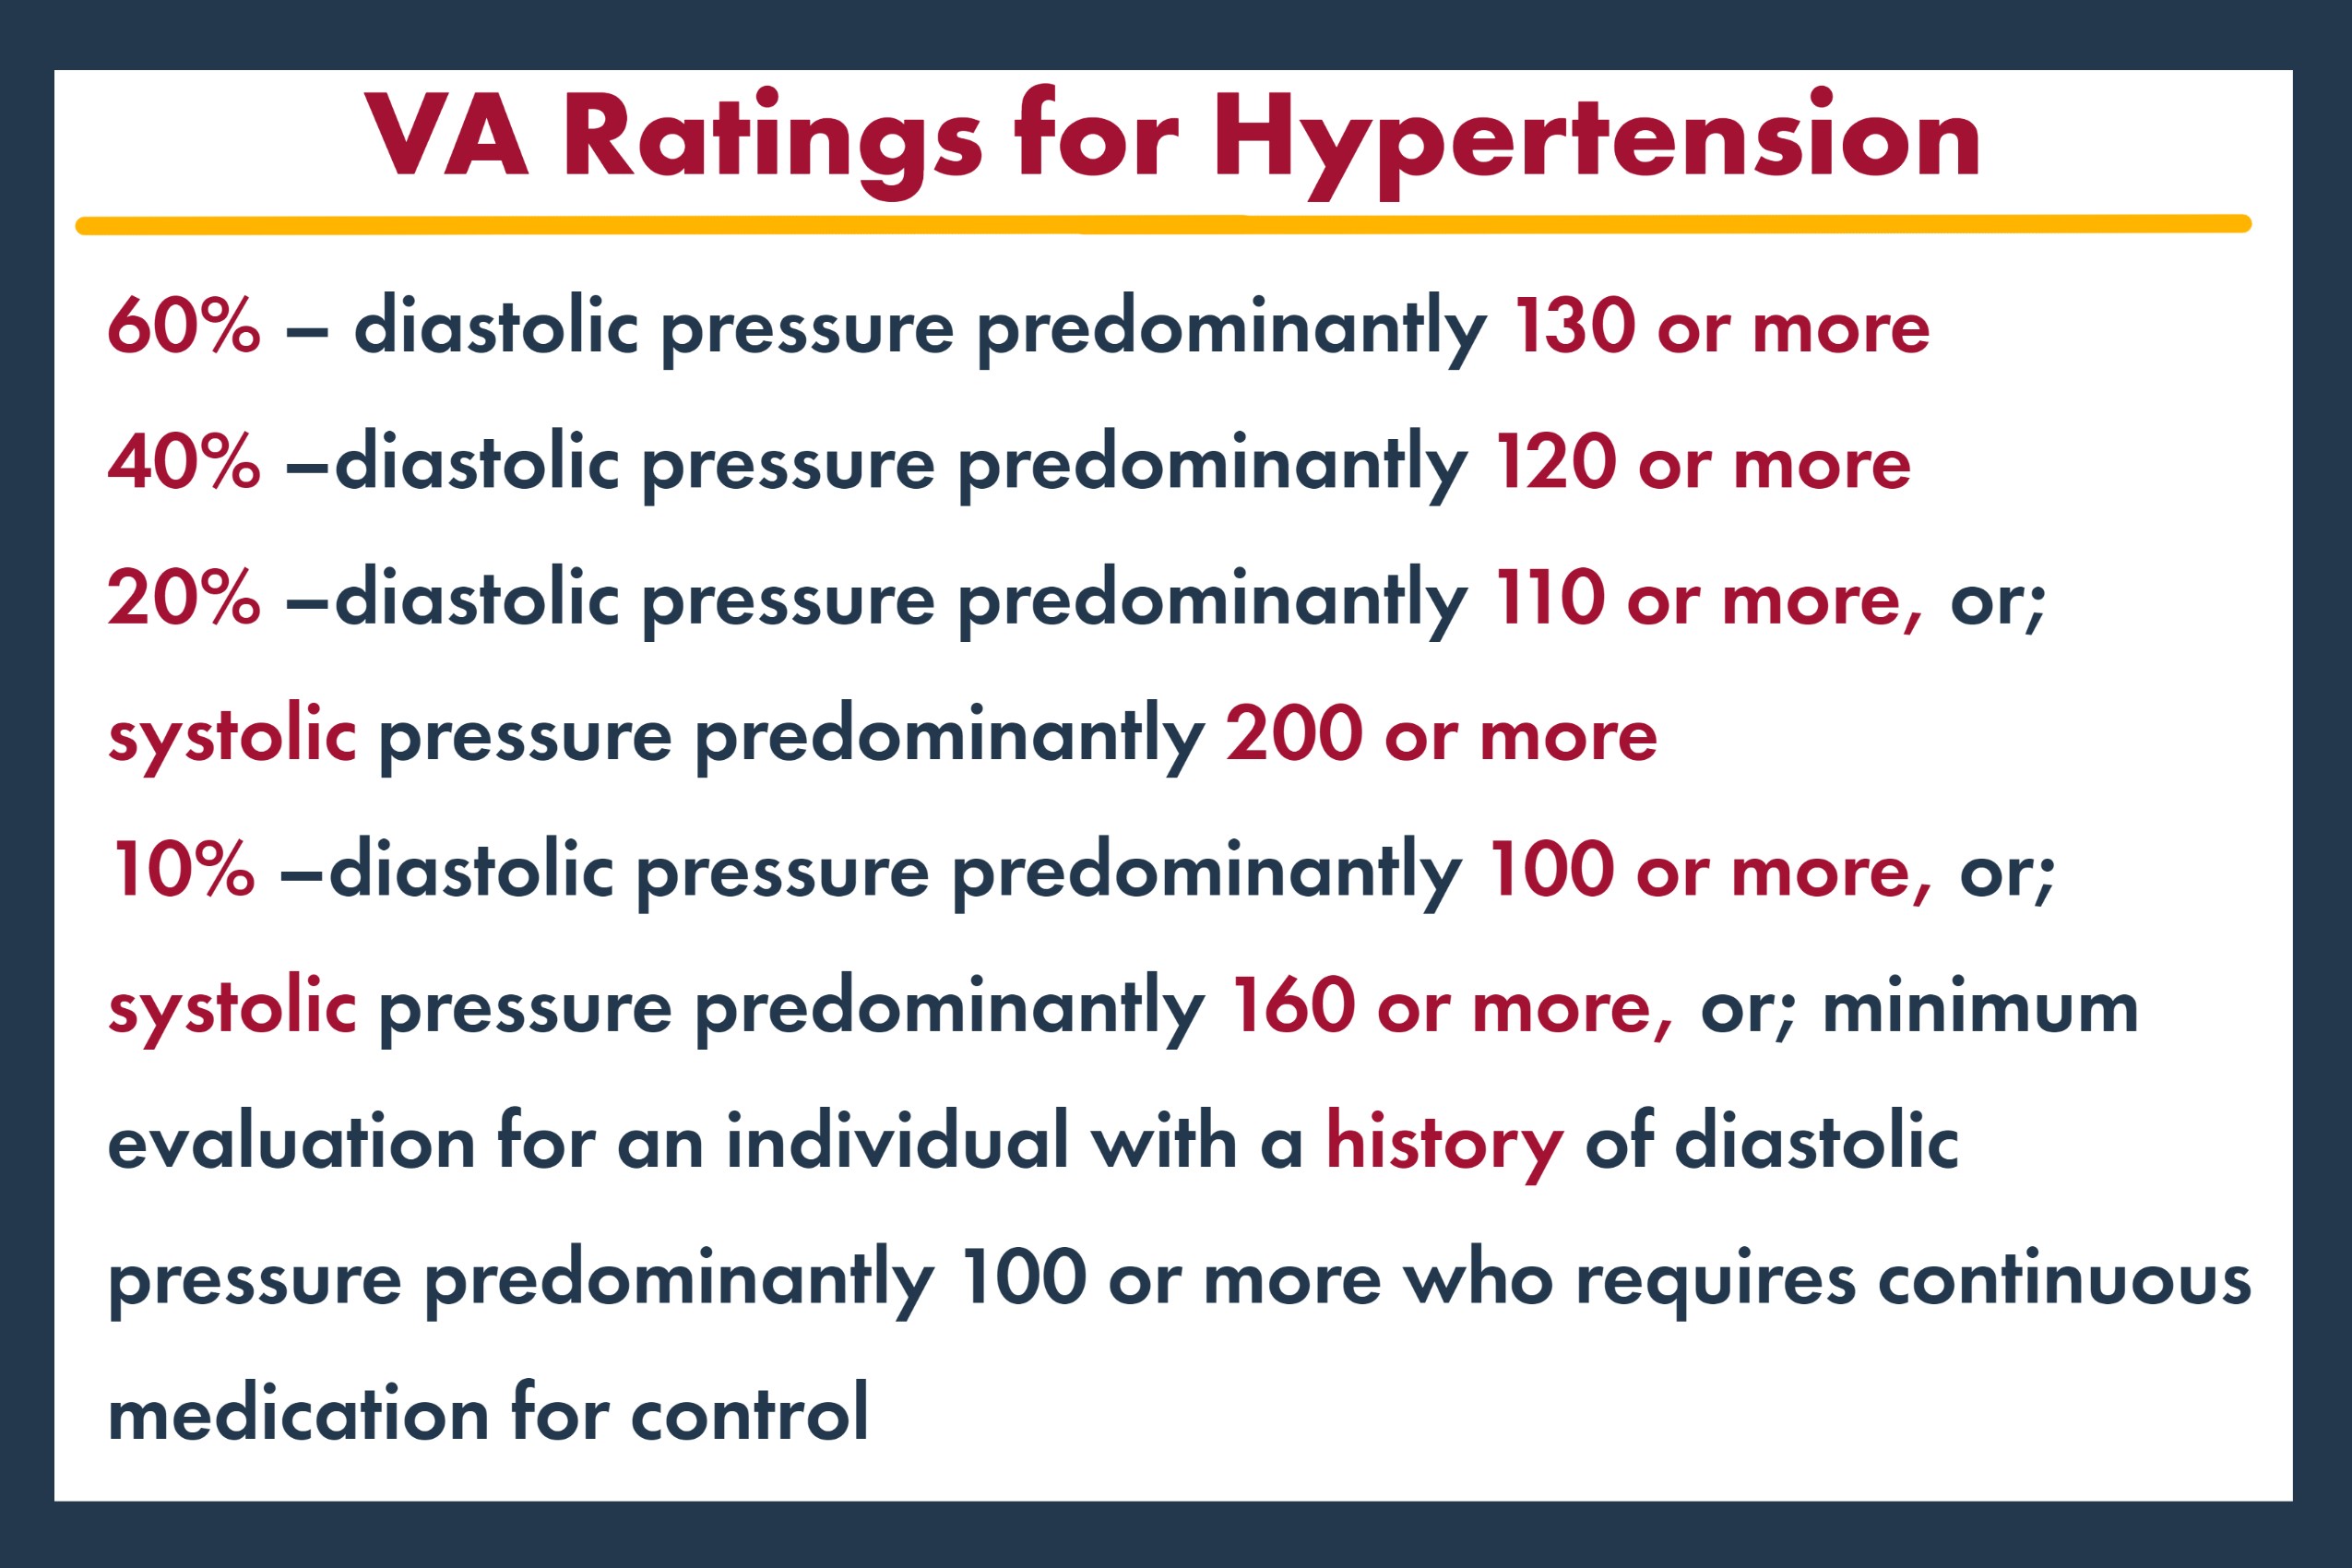 va ratings for hypertension 60% – diastolic pressure predominantly 130 or more 40% –diastolic pressure predominantly 120 or more 20% –diastolic pressure predominantly 110 or more, or; systolic pressure predominantly 200 or more 10% –diastolic pressure predominantly 100 or more, or; systolic pressure predominantly 160 or more, or; minimum evaluation for an individual with a history of diastolic pressure predominantly 100 or more who requires continuous medication for control